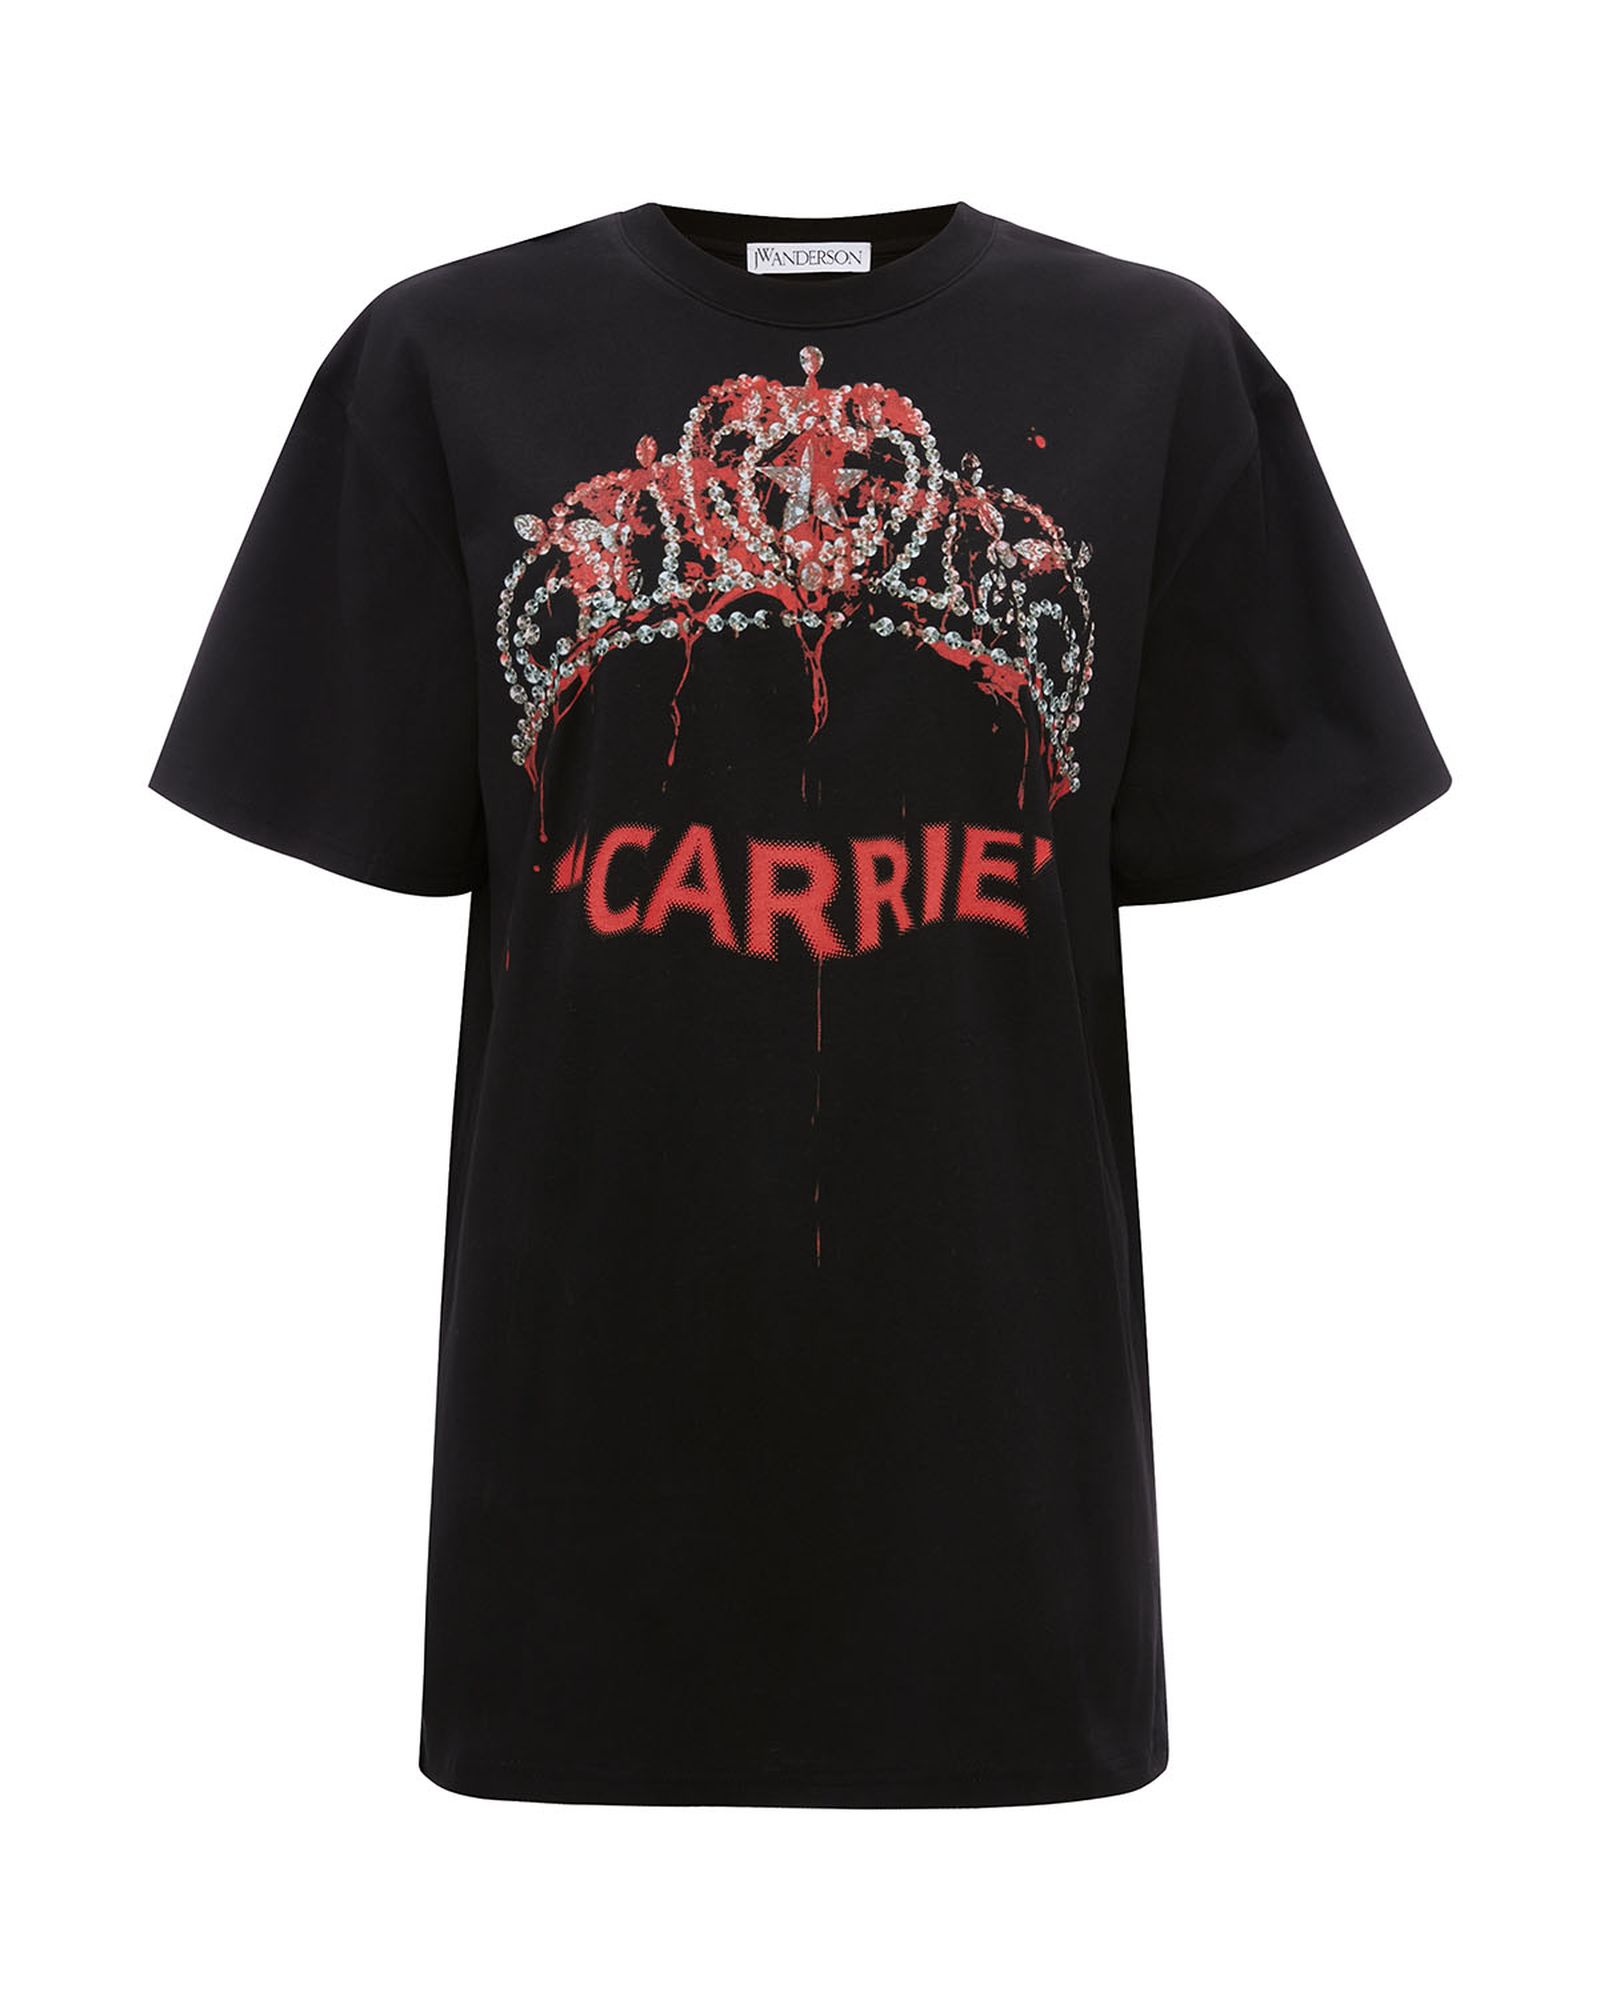 jw-anderson-carrie-collaboration-9